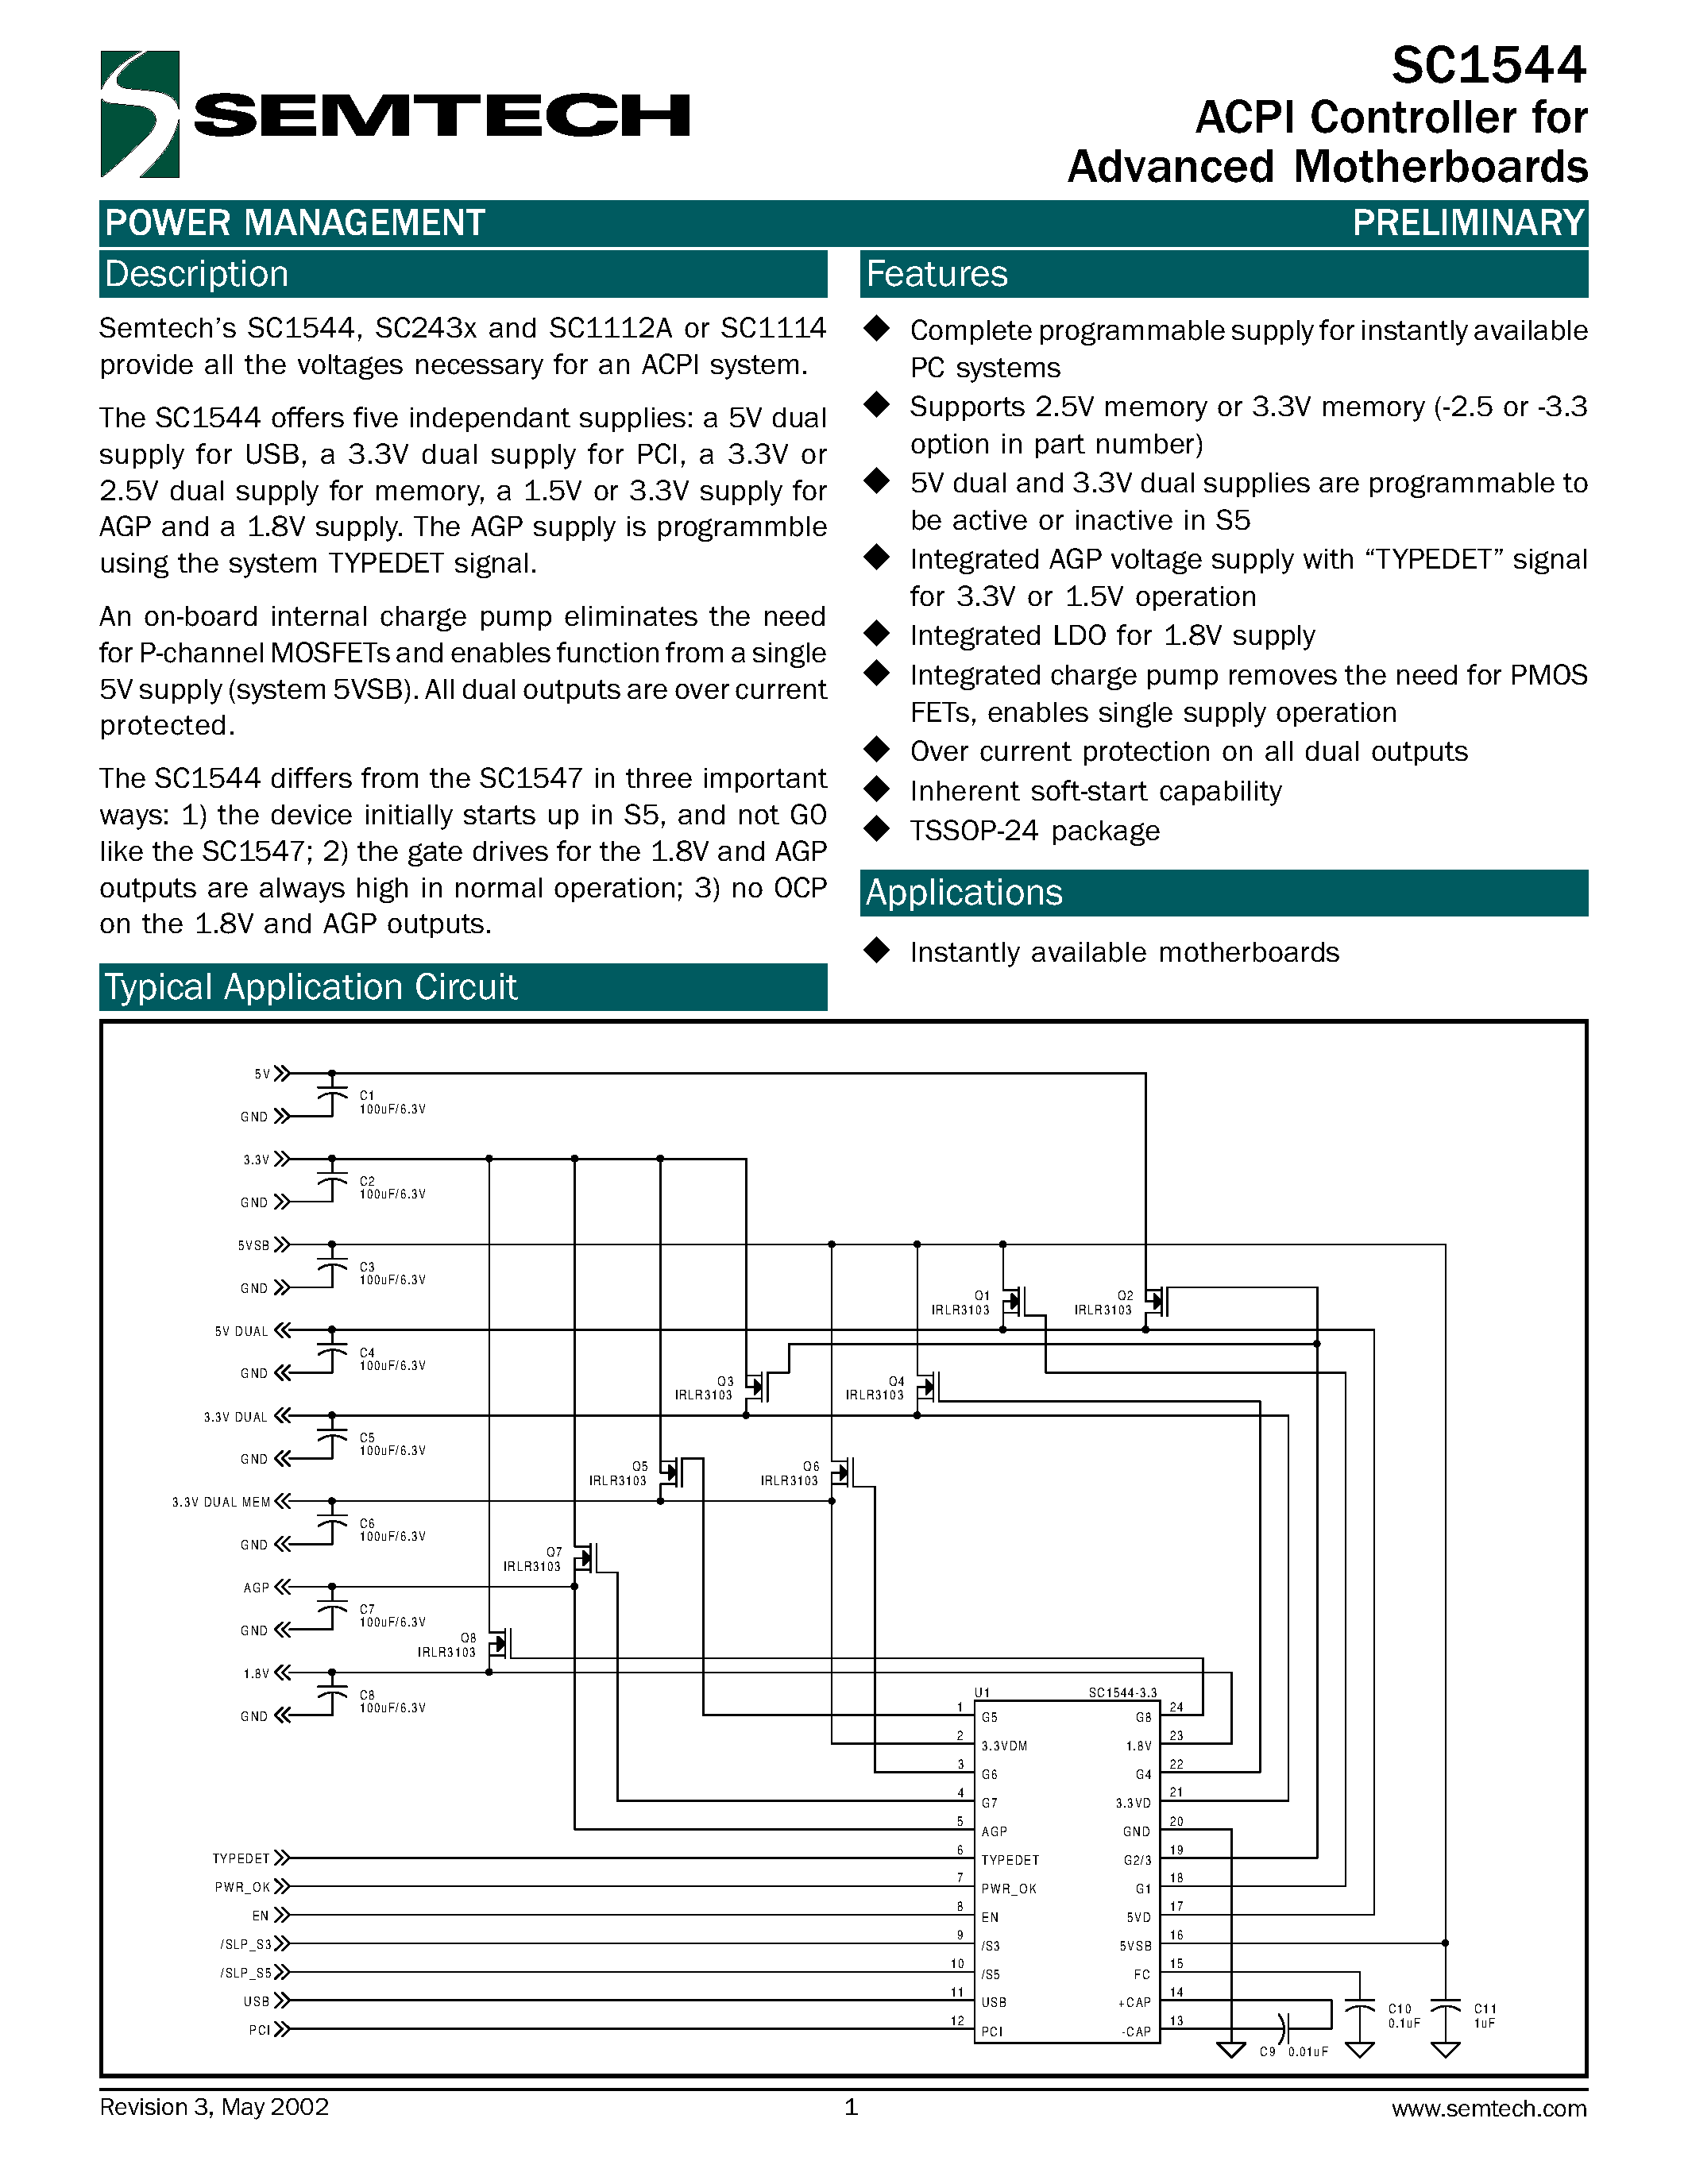 Datasheet SC1544TS-X.XTR - ACPI Controller for Advanced Motherboards page 1